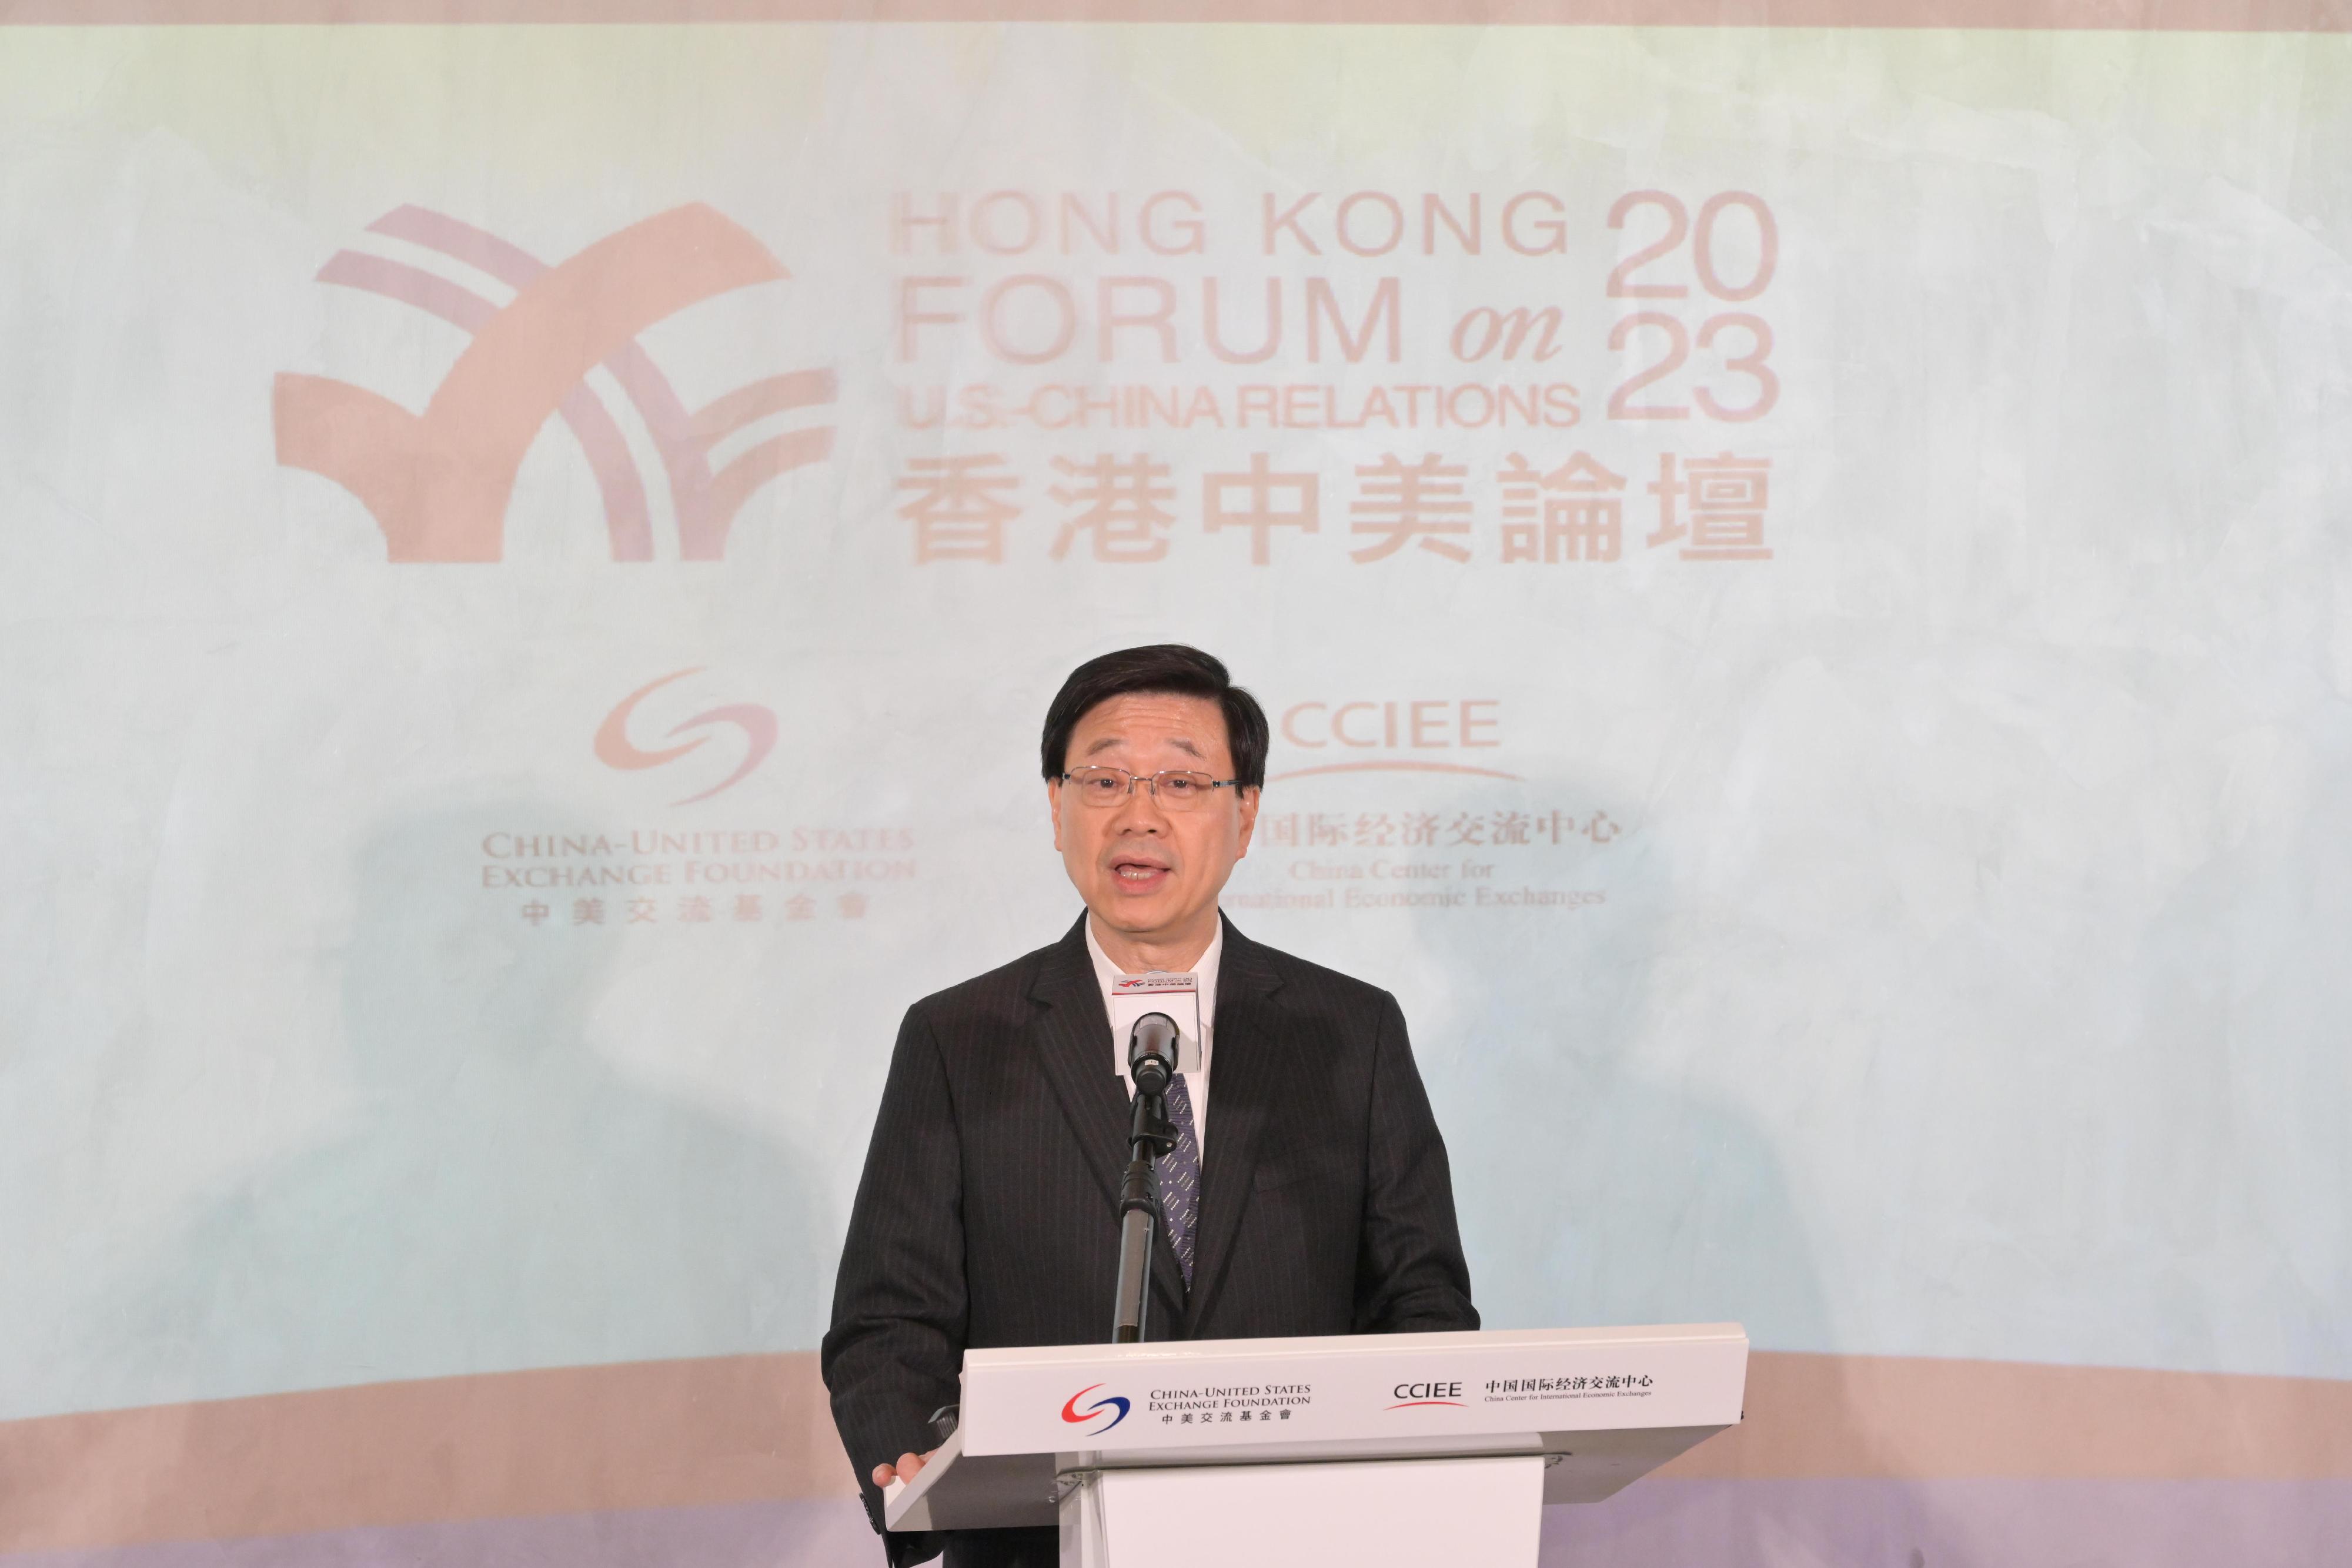 The Chief Executive, Mr John Lee, speaks at the Hong Kong Forum on US-China Relations 2023 Welcome Dinner 2023 today (November 9).